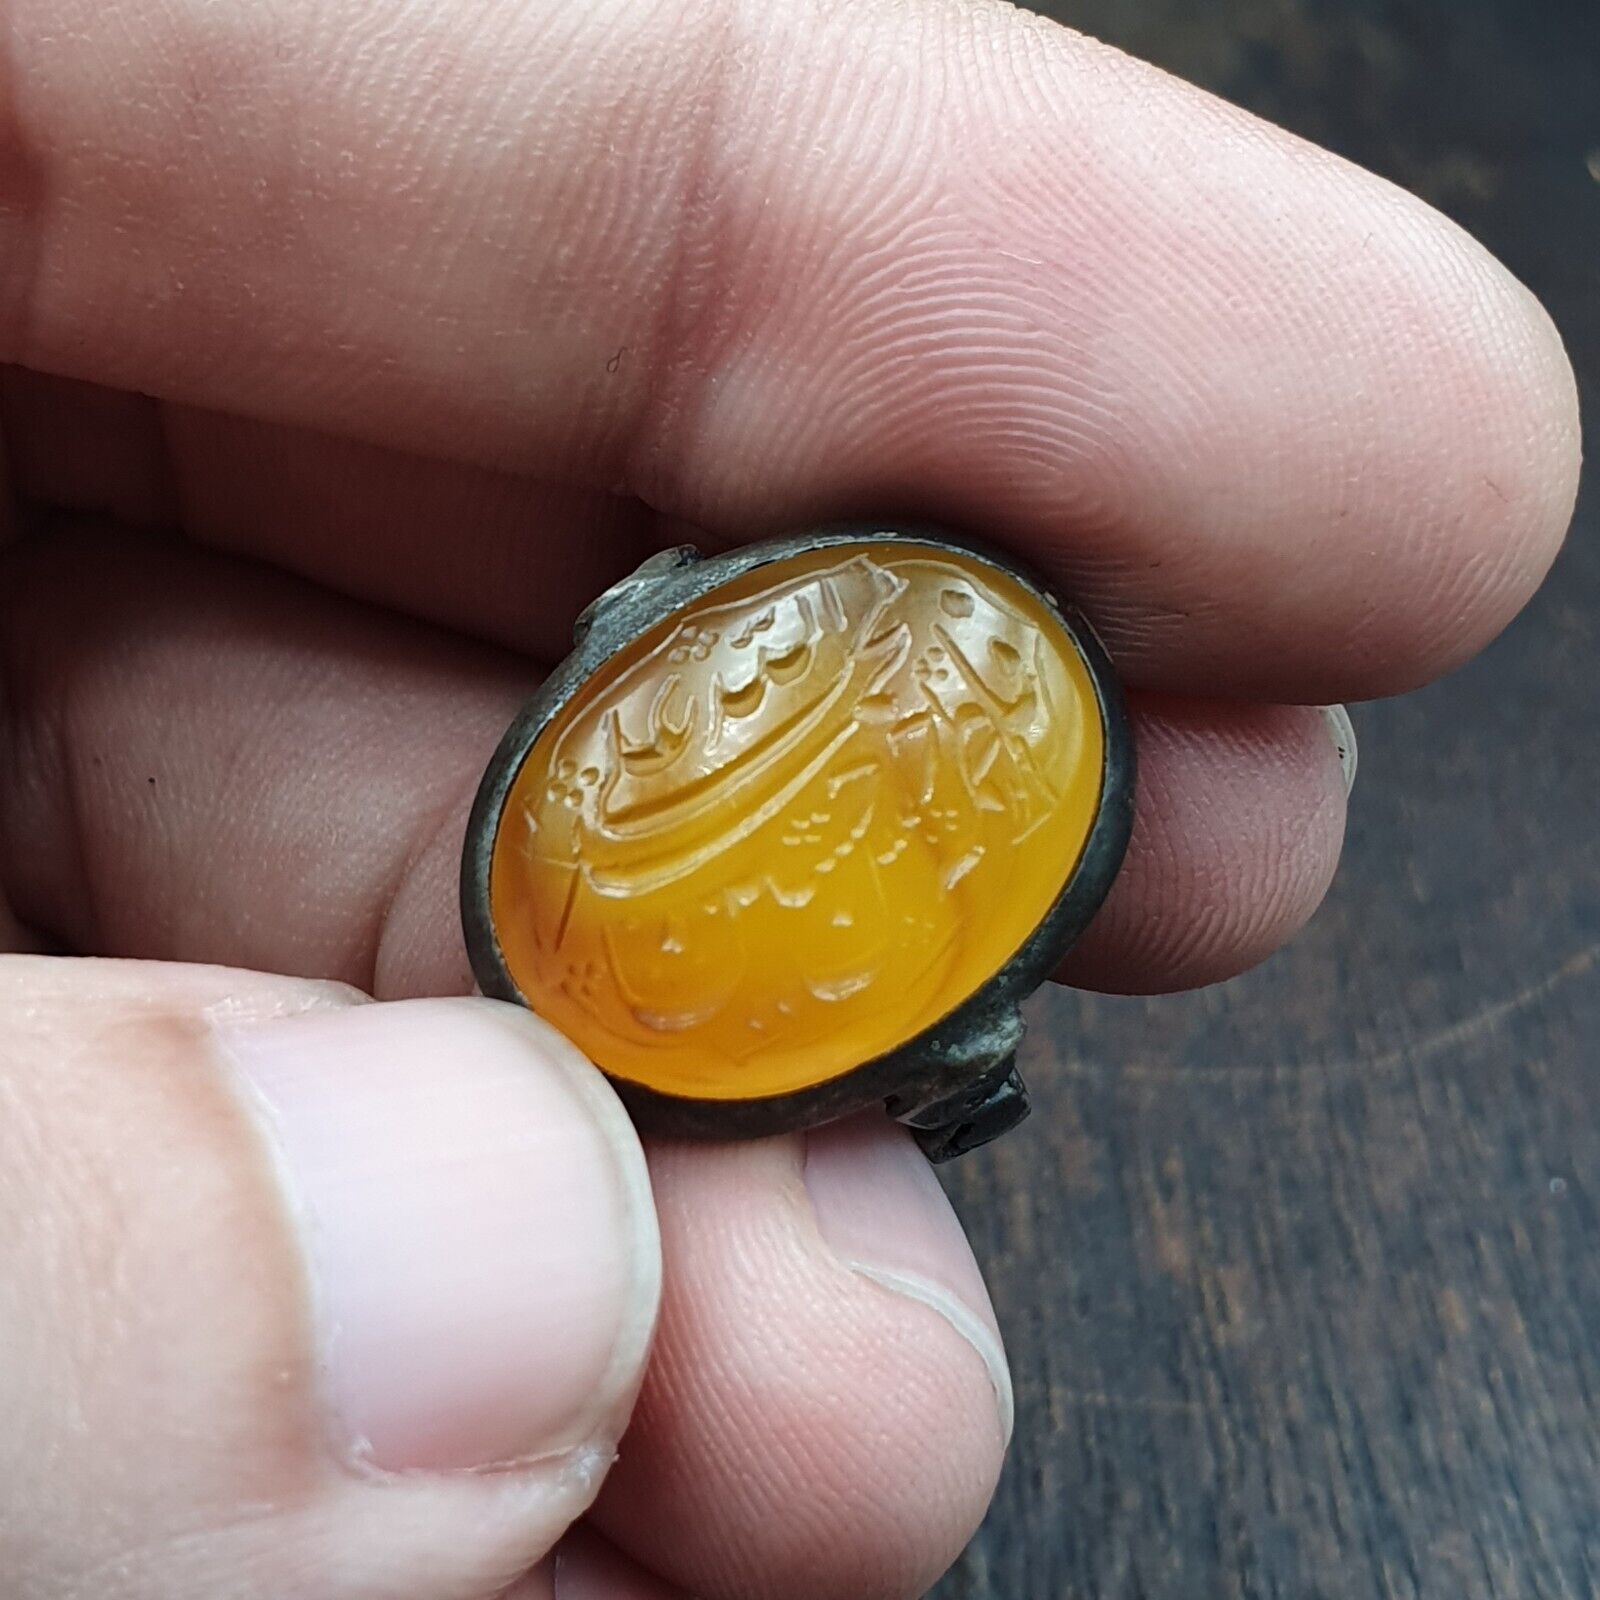 Antique Islamic Yellow Carving Agate Stone 925 Sterling Silver Ring